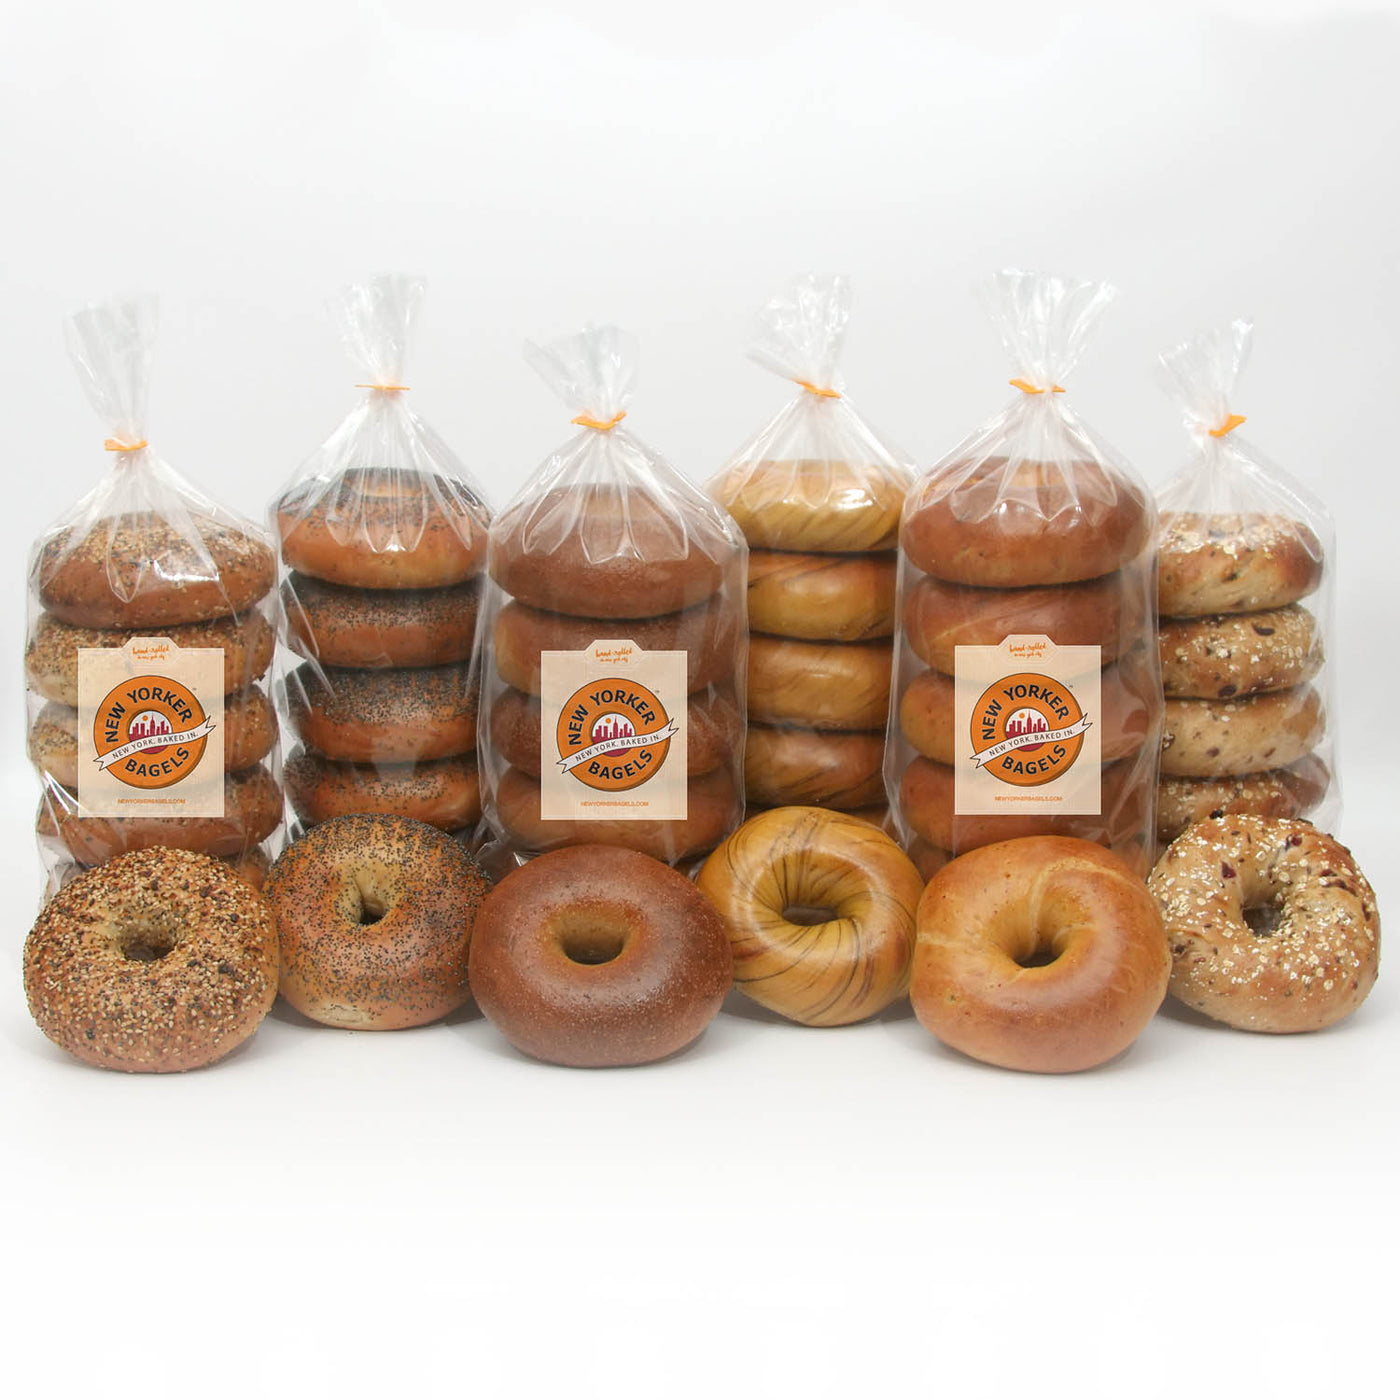 Curated NY Bagel Assortments